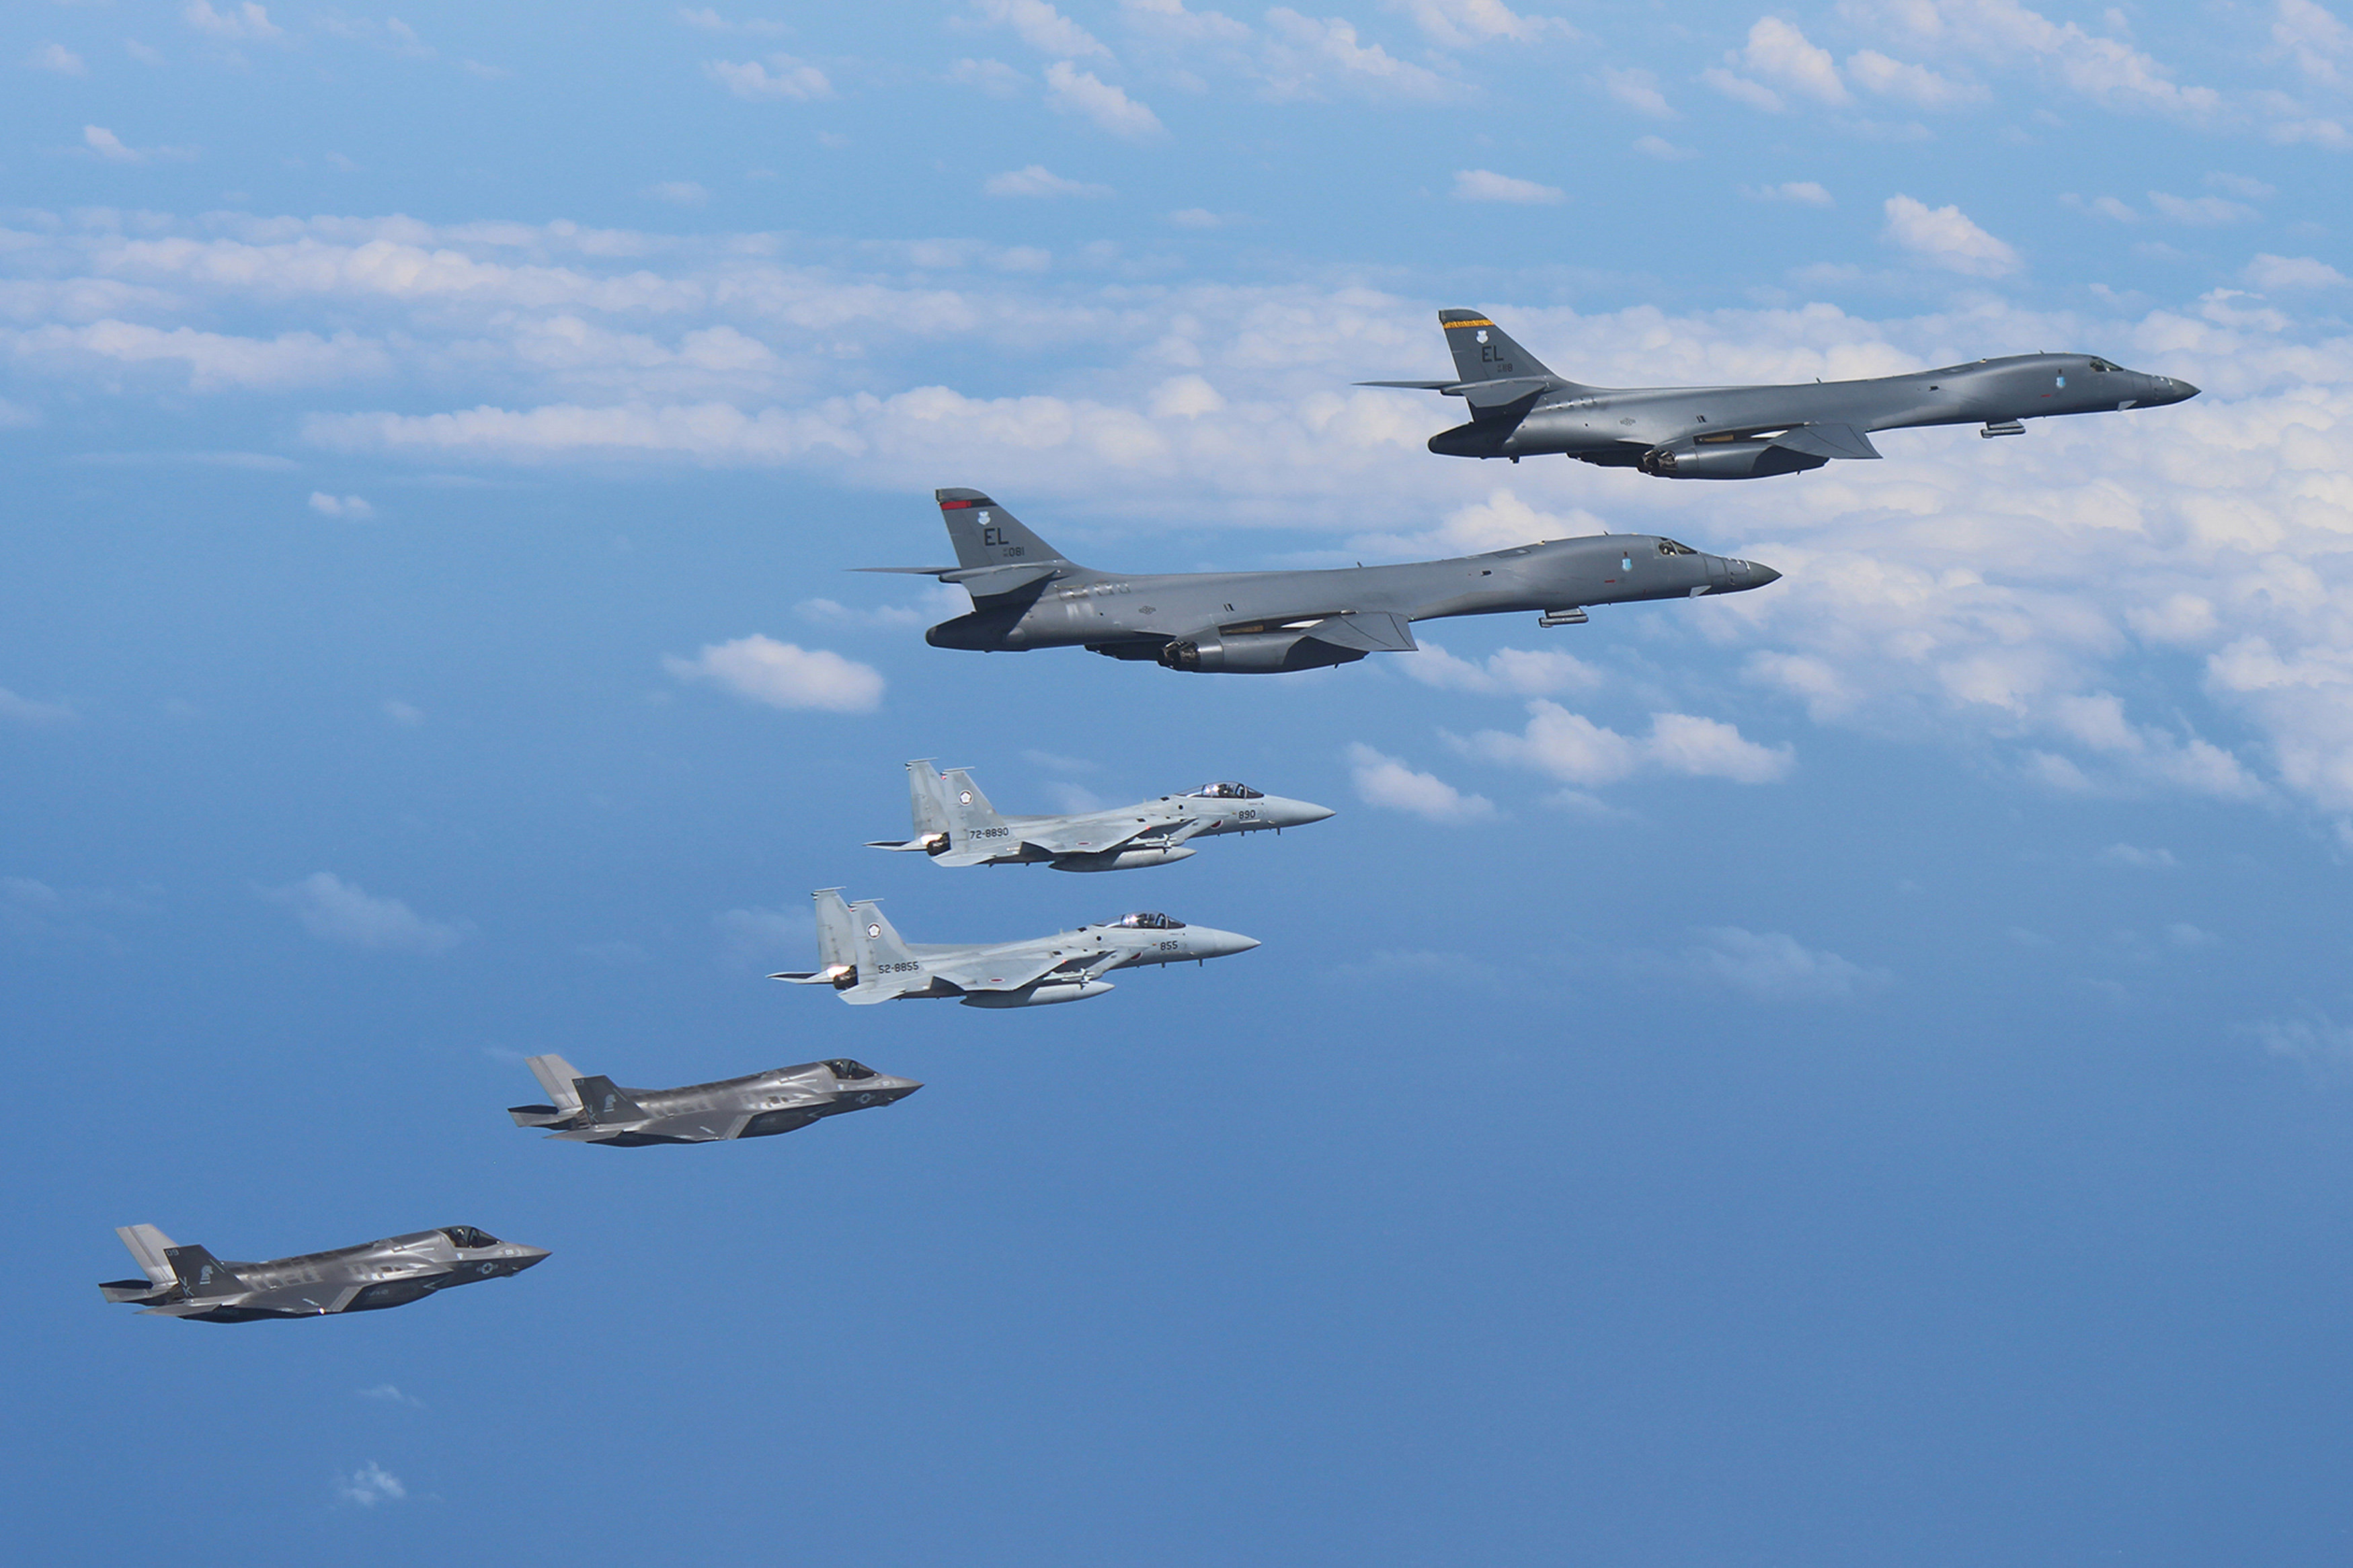 Two U.S. Air Force B-1B Lancer bombers fly from Andersen Air Force Base, Guam, for a mission, with an escort of a pair of Japan Self-Defense Forces F-15 fighter jets and U.S. Marines' F-35B fighter jets in the vicinity of Kyushu, Japan, in this photo released by Air Staff Office of the Defense Ministry of Japan August 31, 2017. Air Staff Office of the Defense Ministry of Japan/HANDOUT via REUTERS ATTENTION EDITORS - THIS IMAGE WAS PROVIDED BY A THIRD PARTY.